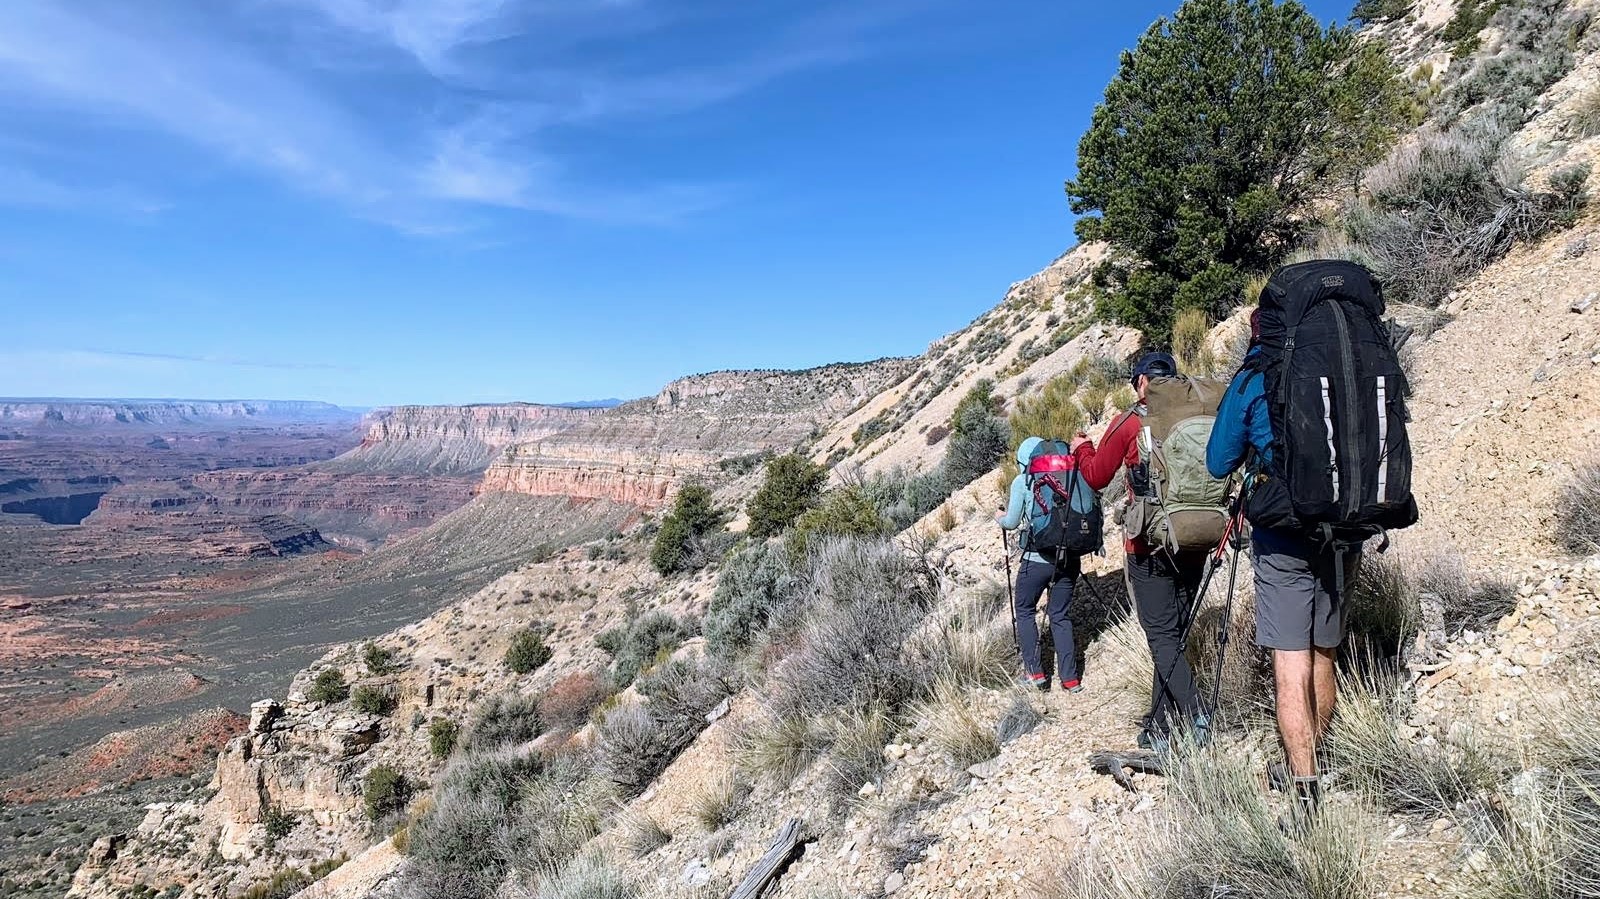 Returning to North Rim from Thunder River